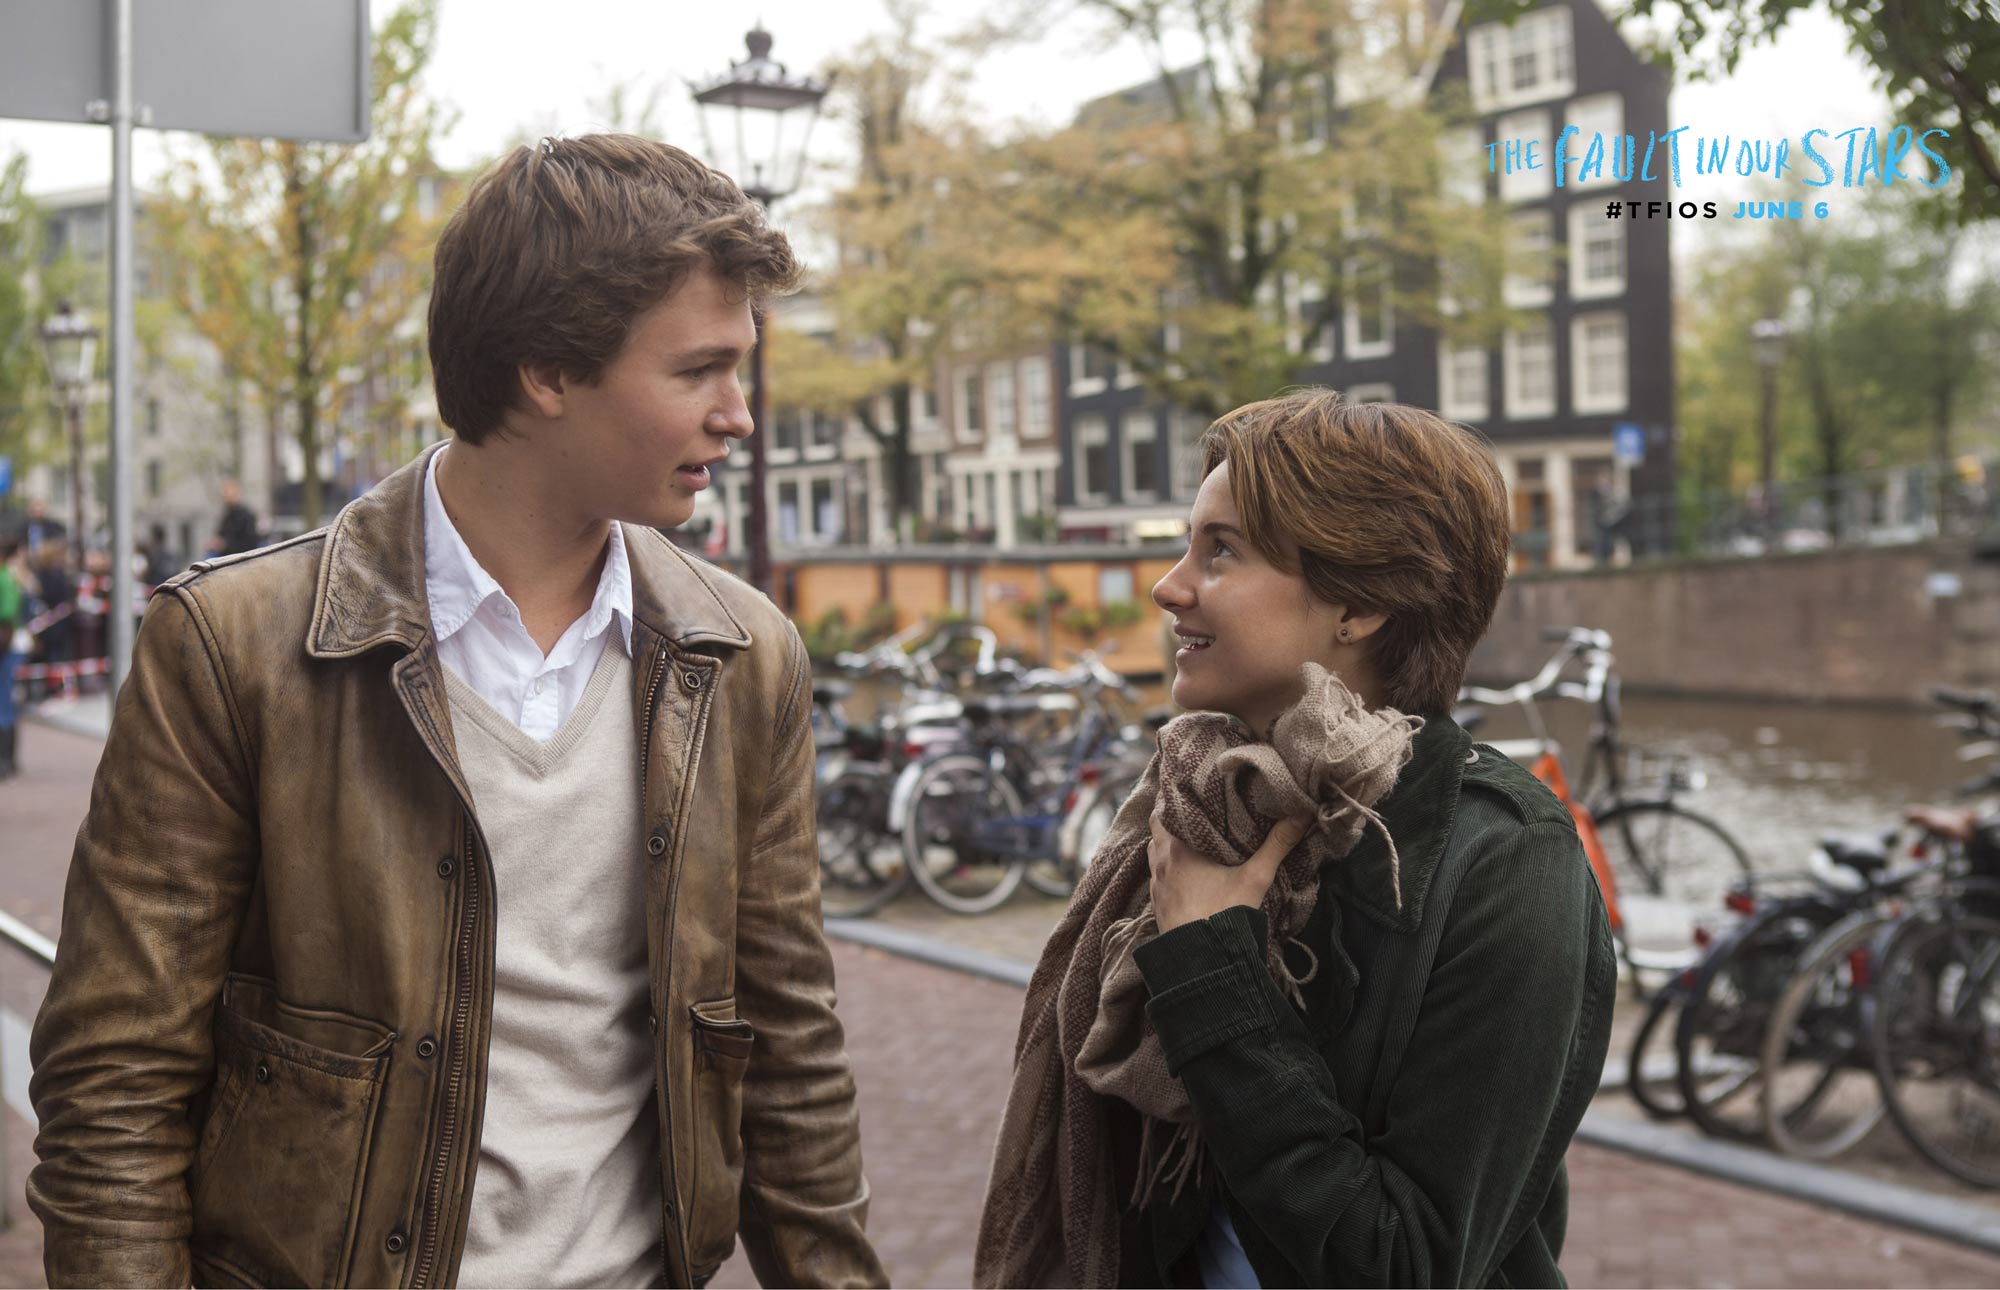 Hazel Green (Shailene Woodley) and Augustus Waters (Ansel Elgort) in one of their first few encounters. (The Fault in Our Stars official website)